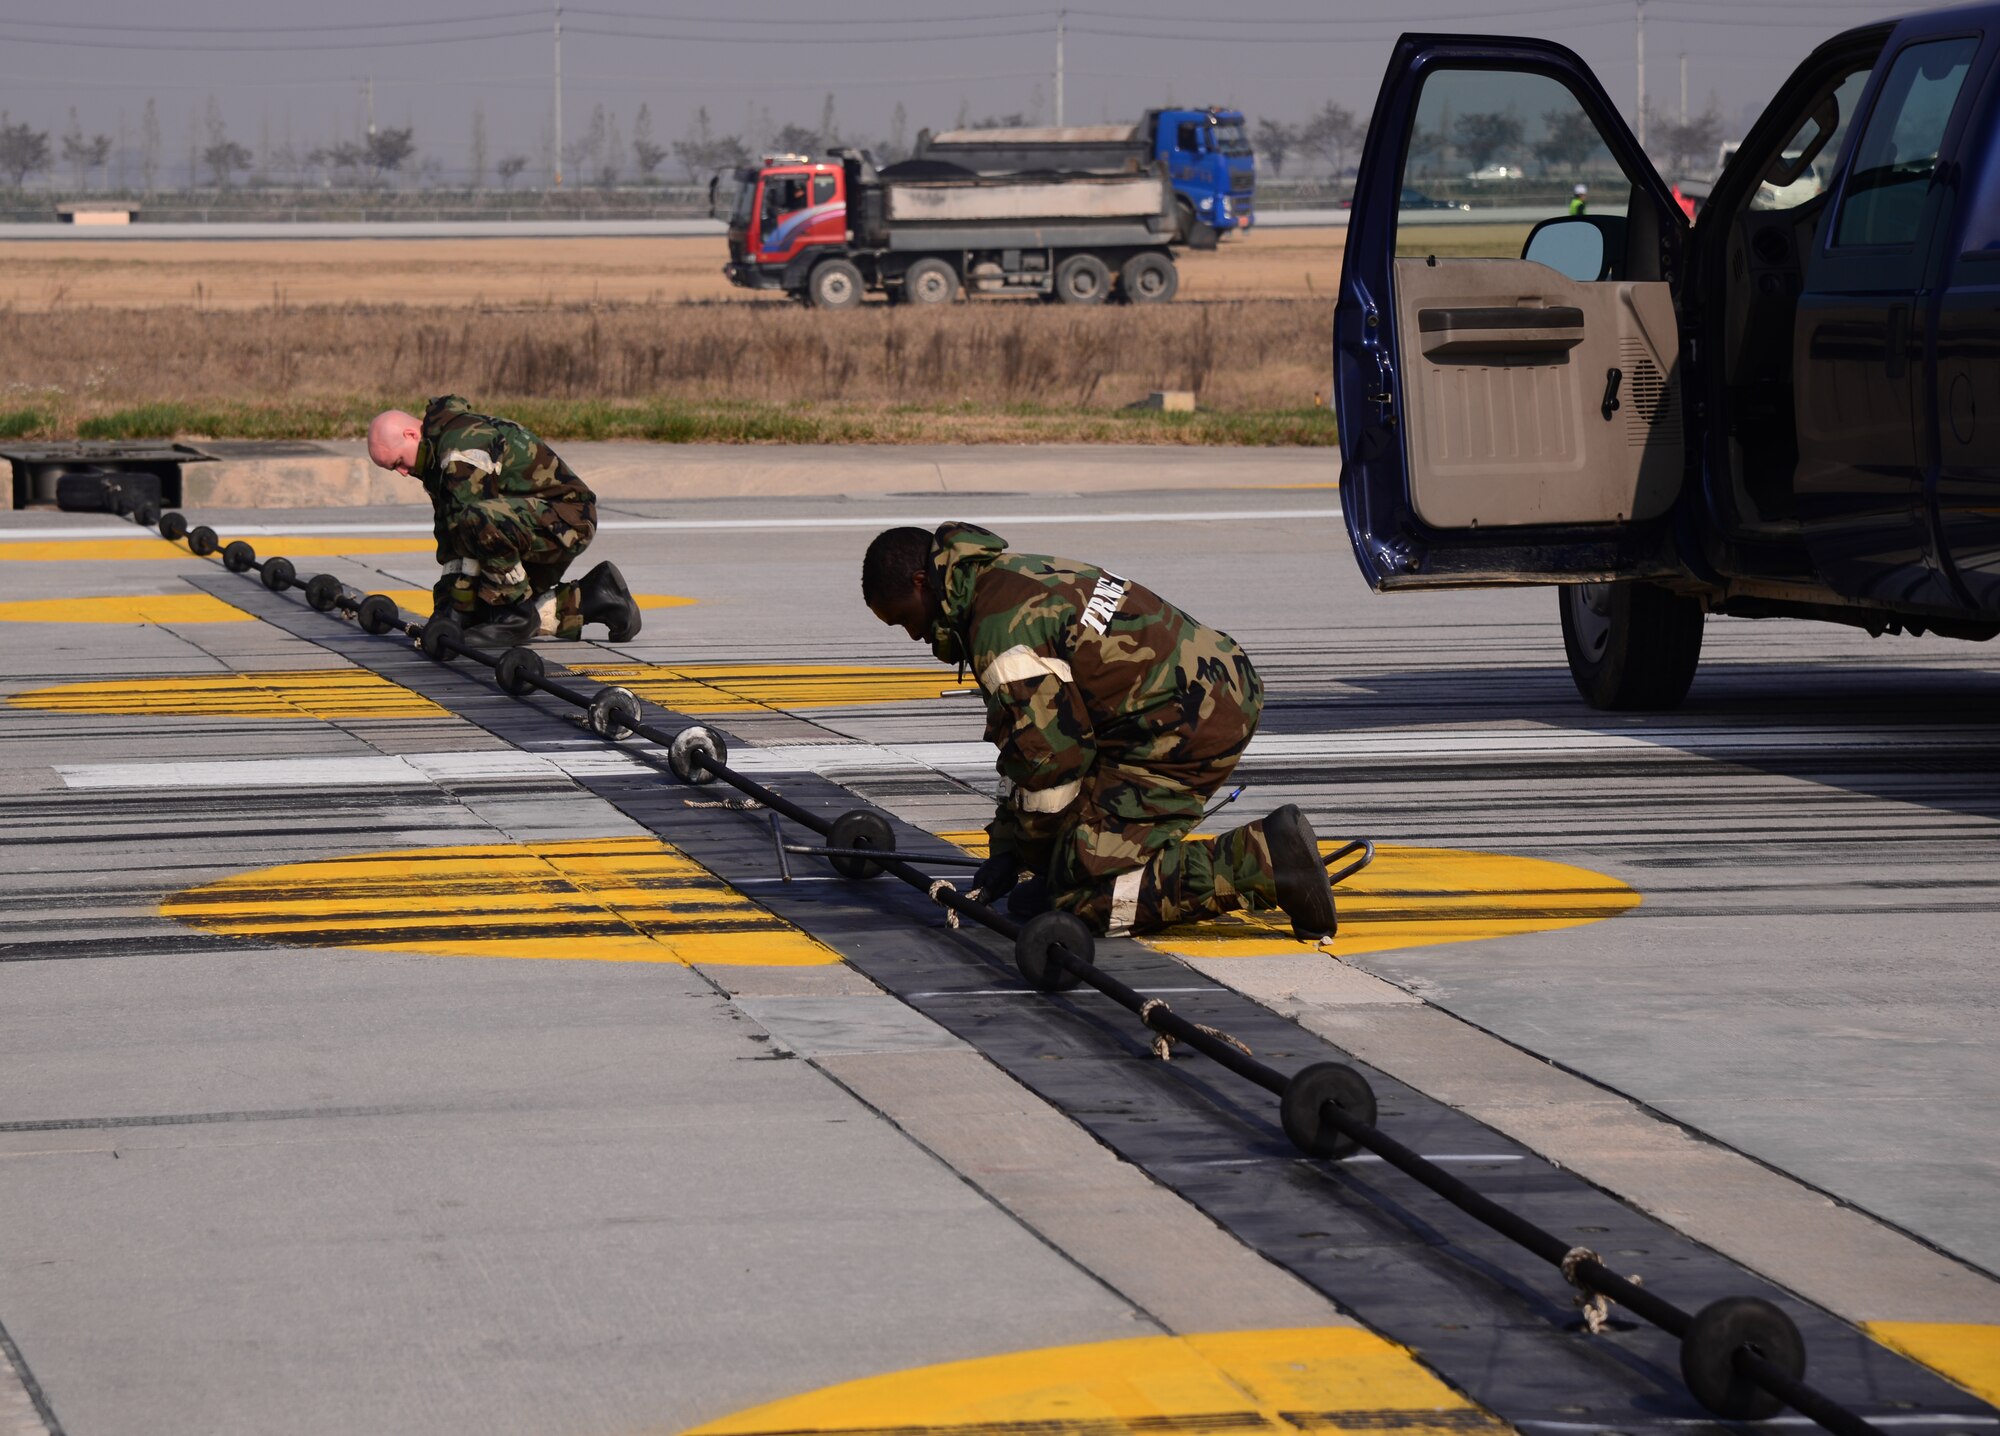 Airmen assigned to 51st Civil Engineer Squadron barrier management flight raise a barrier cable in the event a fighter jet over shoots the runway or during an emergency Nov. 3, 2015, at Osan Air Base, Republic of Korea. Barrier management airmen and airfield managers from the 51st Fighter Wing ensure the flightline is operational for aircraft participating in readiness exercise Vigilant Ace 16. Vigilant Ace 16 is a large-scale exercise designed to test the combat capabilities and enhance the interoperability of the U.S. and Republic of Korea Air Forces. (U.S. Air Force photo/Staff Sgt. Benjamin Sutton)